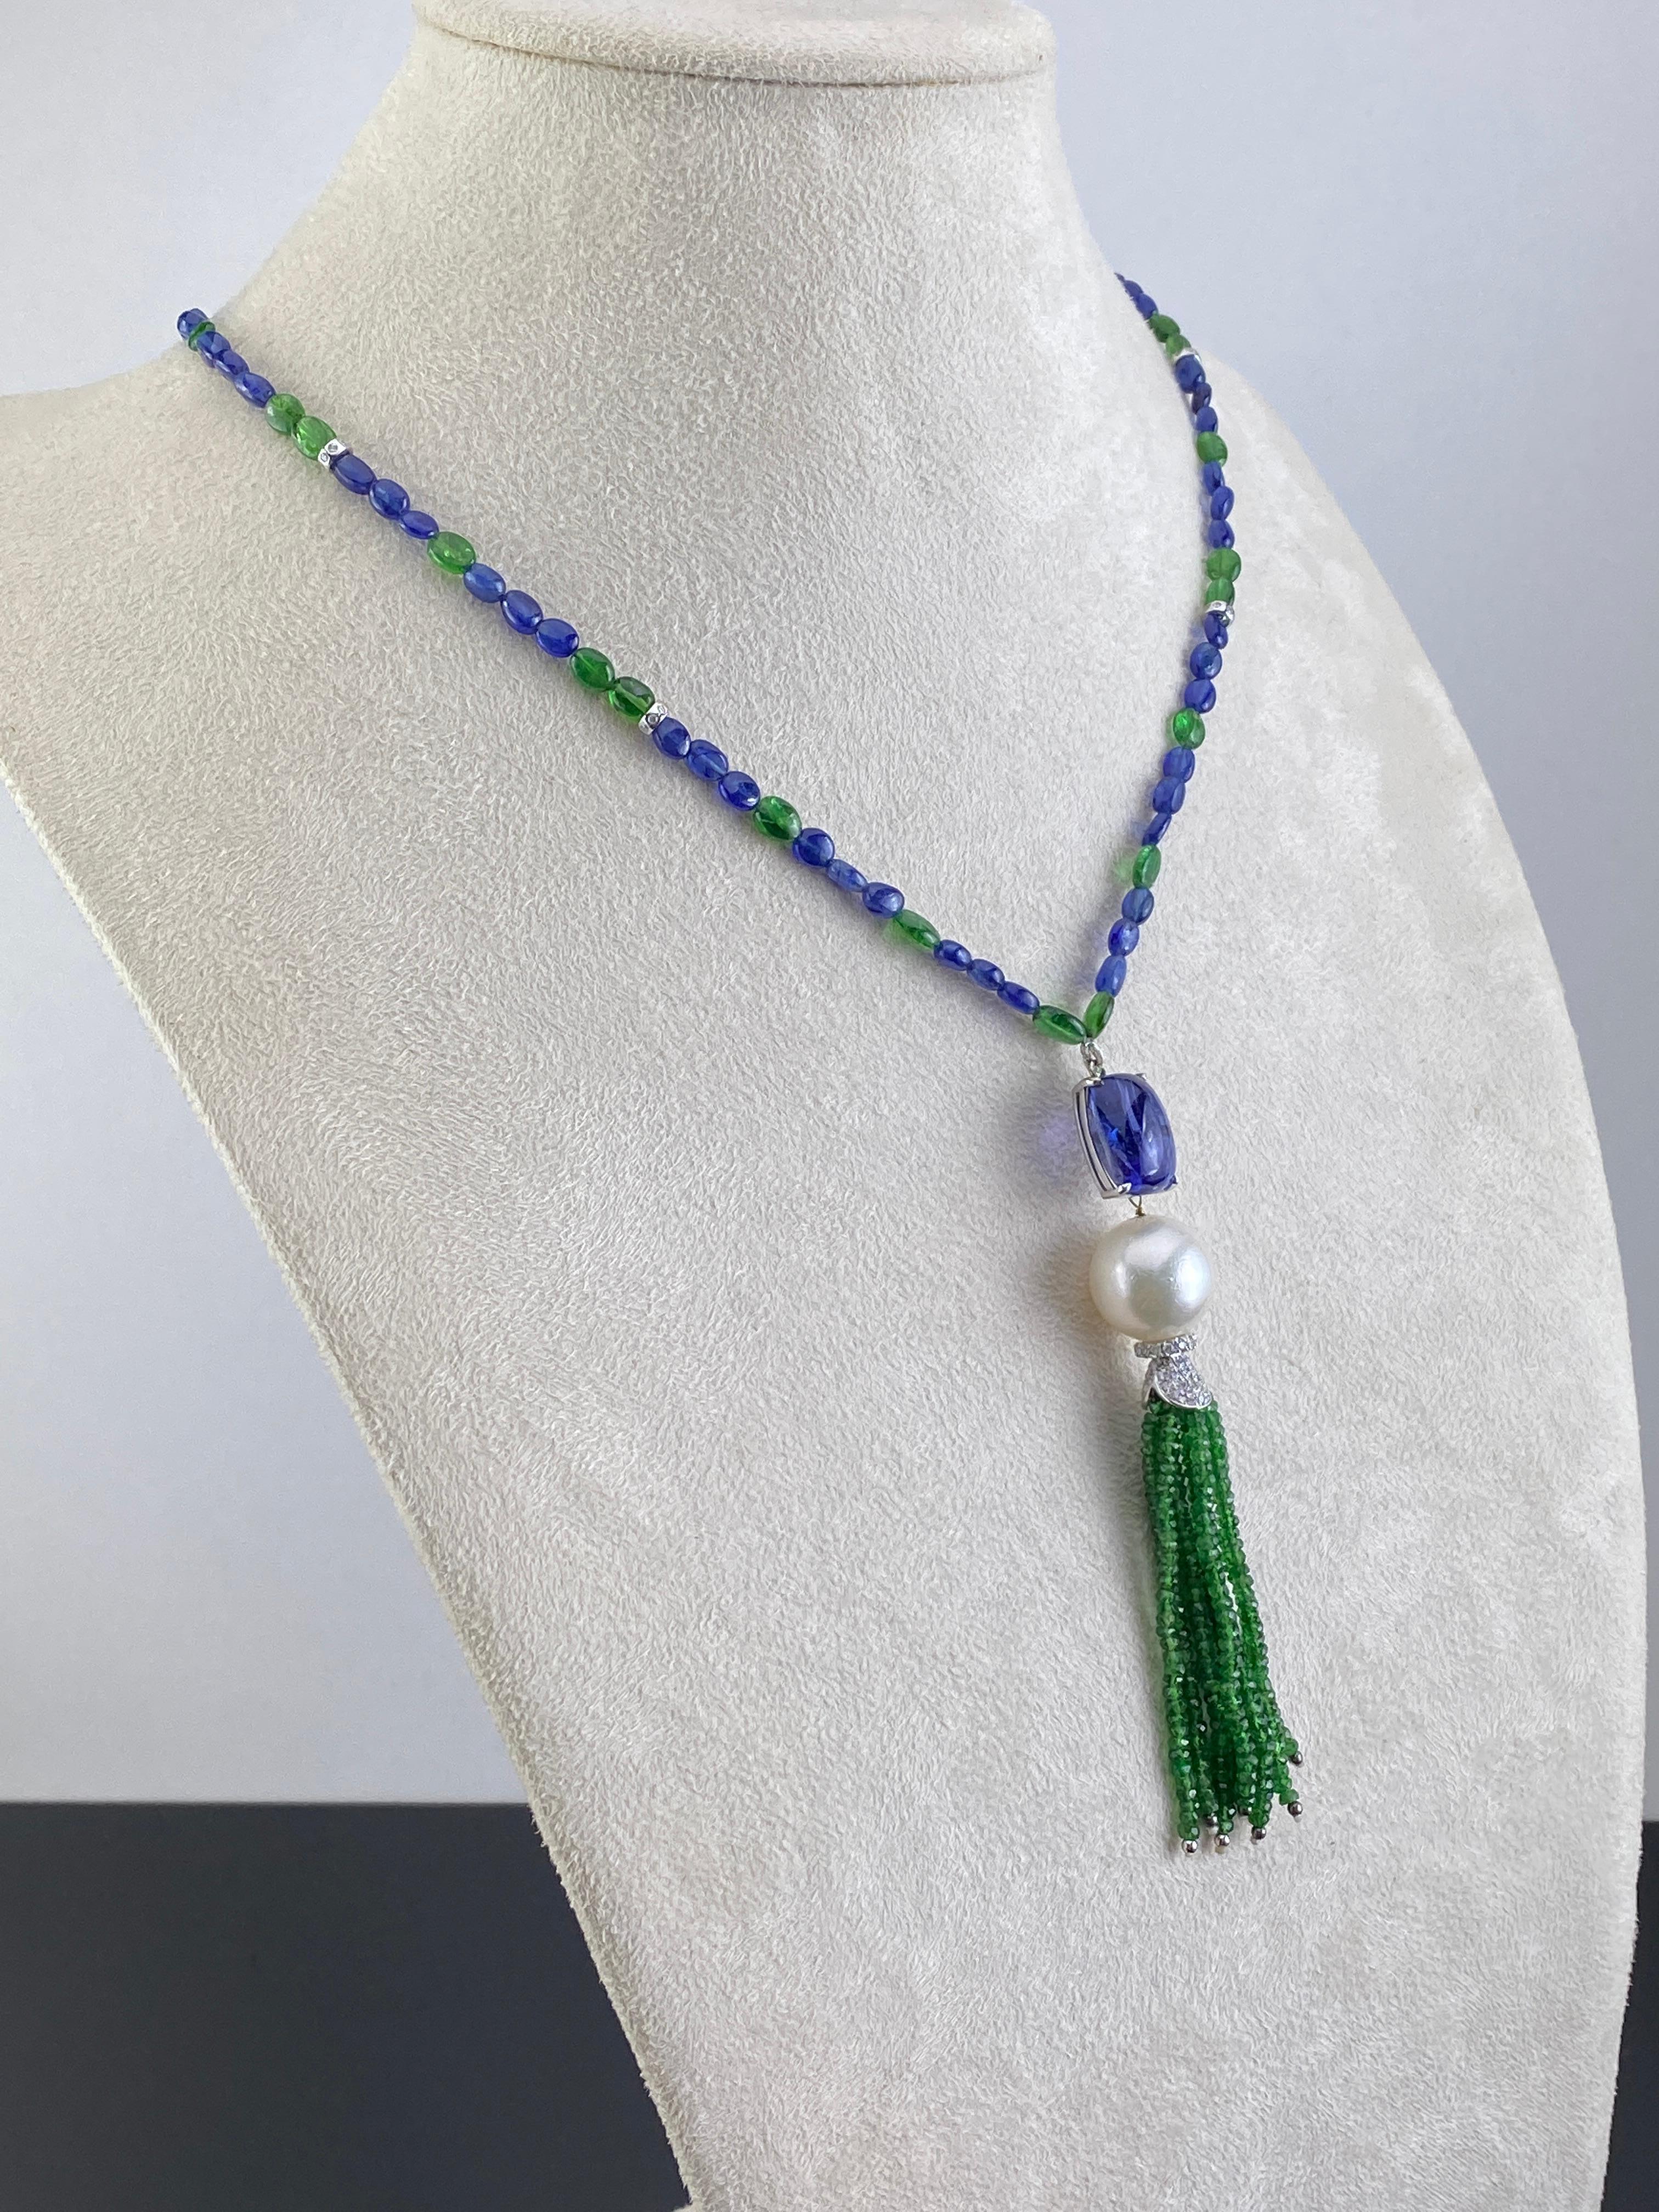 A very unique beaded Sapphire and Emerald necklace, with a Tanzanite, Pearl and Emerald tassle set using White Diamonds and 18K Gold. The chain is currently 26 inches long (not including the pendant), the length can be altered according to your